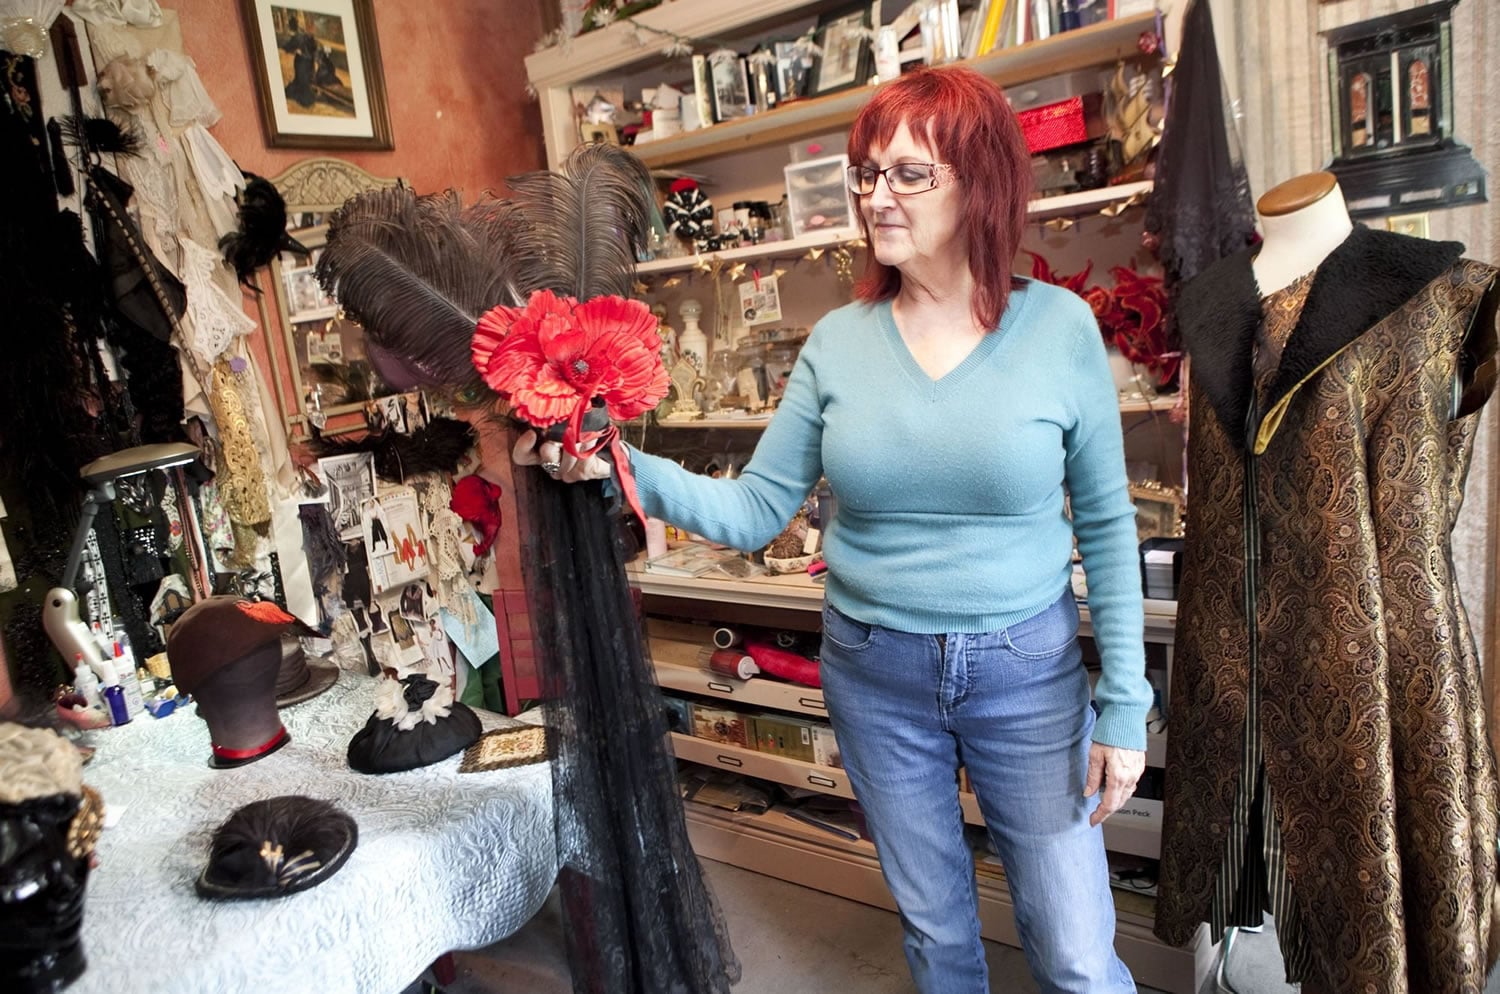 Yacolt historical costumer Rebecca Morrison-Peck lived in England for 13 years. She eagerly watched television footage of the royal wedding in April to study the fashions, including the outlandish fascinators.